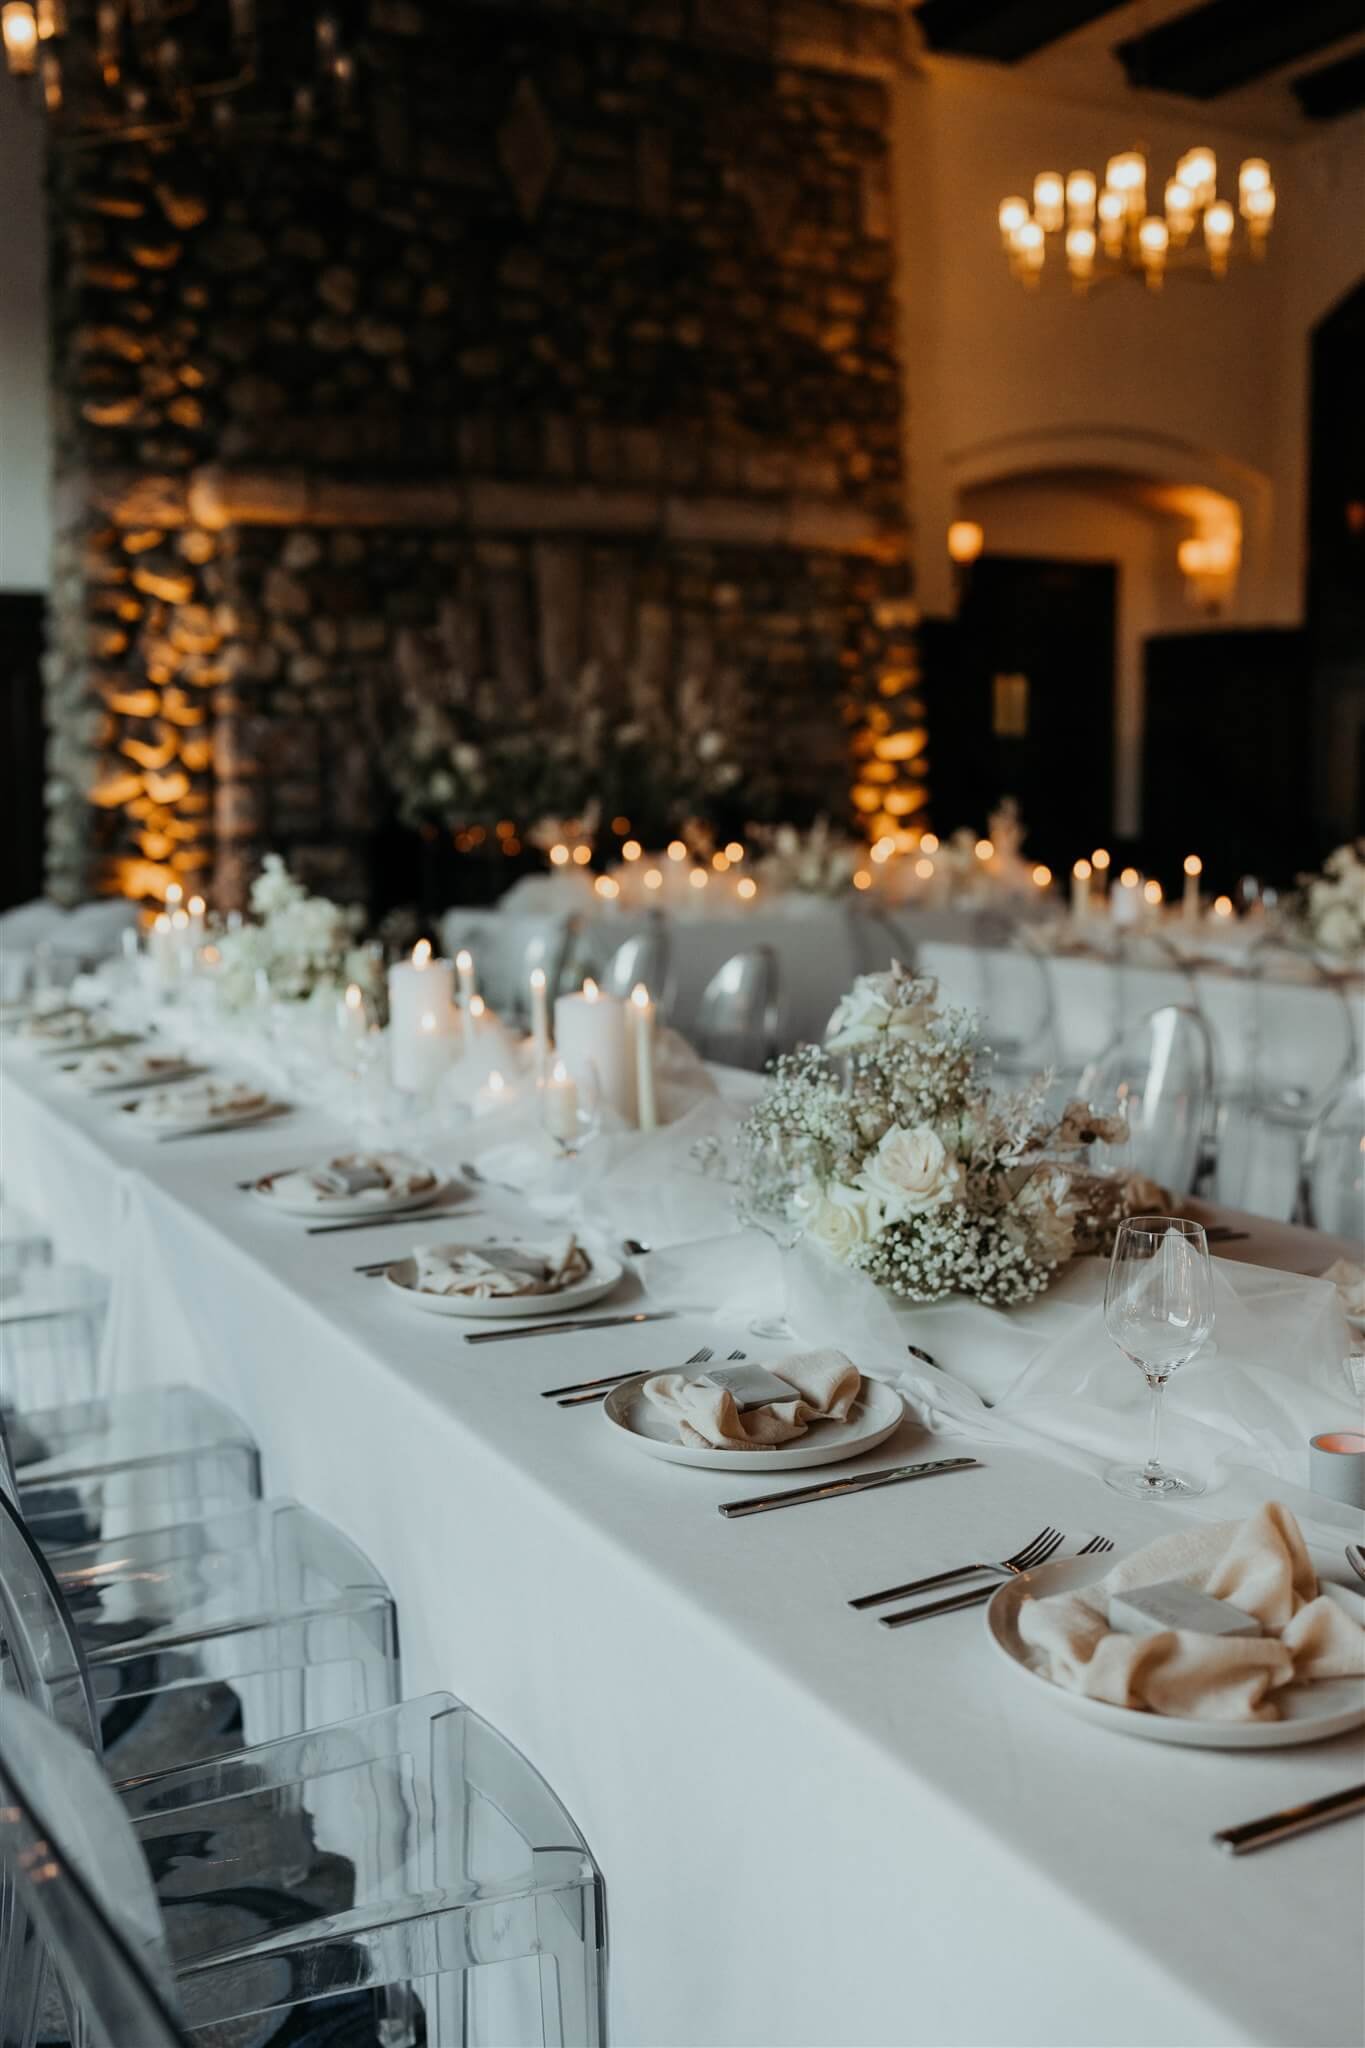 White and gold wedding decorations on reception tables